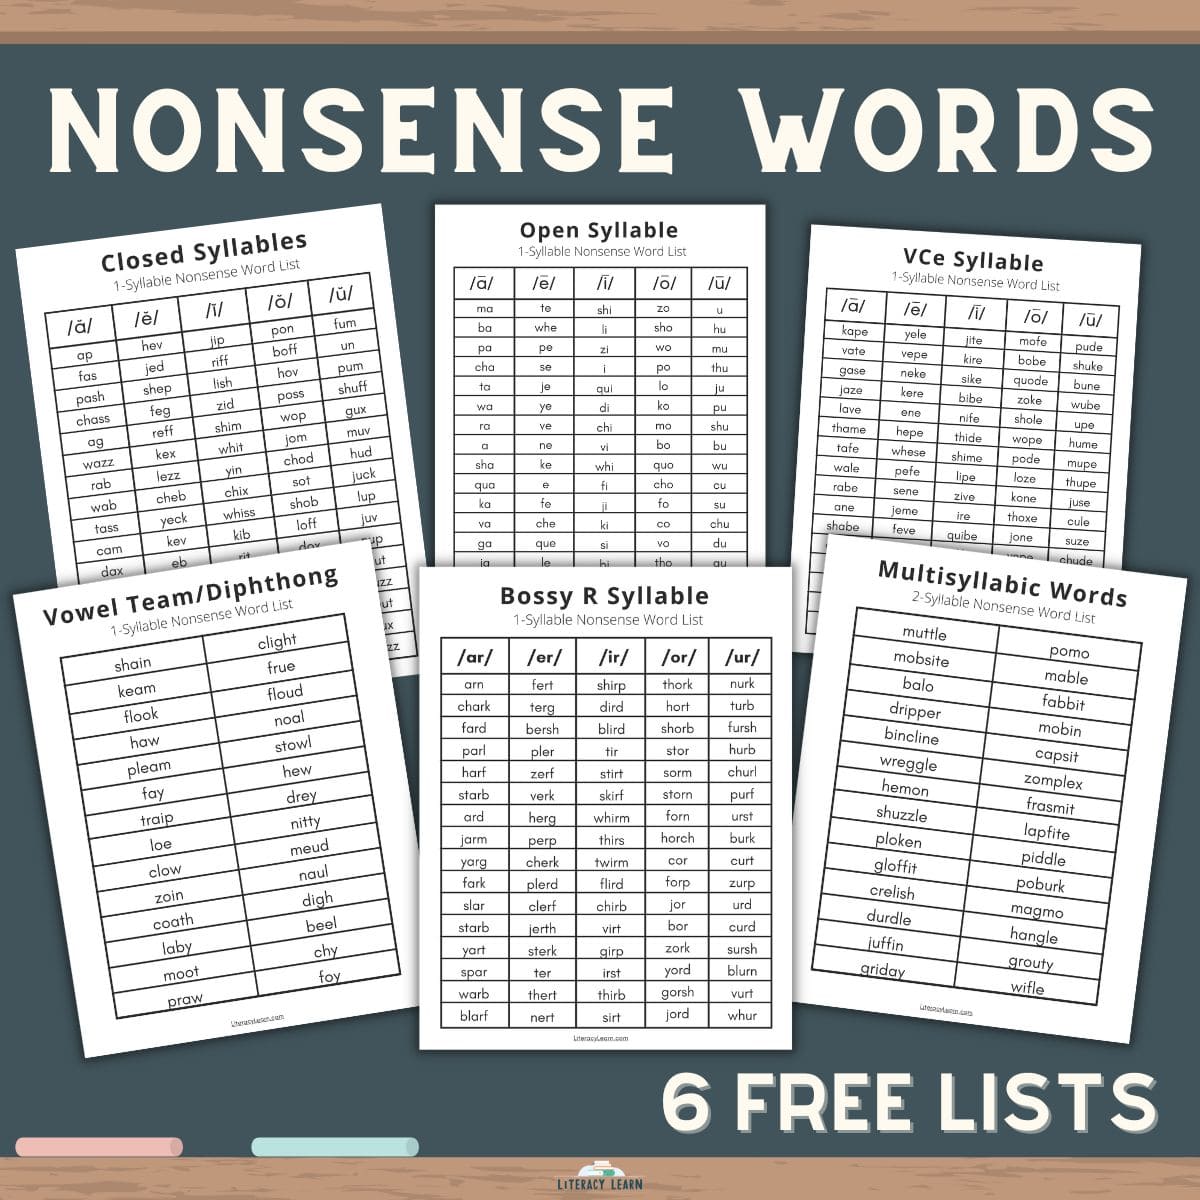 Chalksboard with "Nonsense Words" text and images of 6 nonsense word list worksheets.